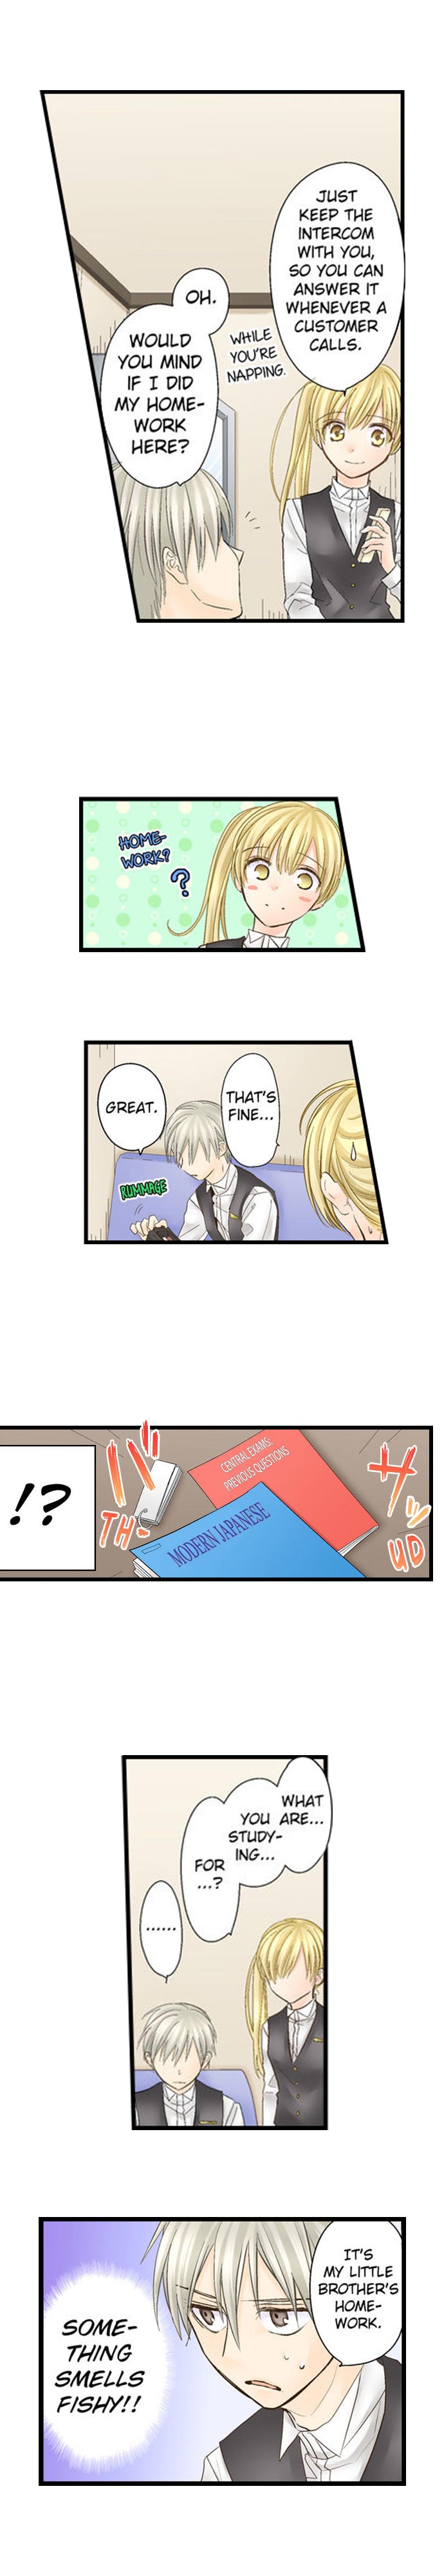 Running a Love Hotel with My Math Teacher - Chapter 22 Page 9